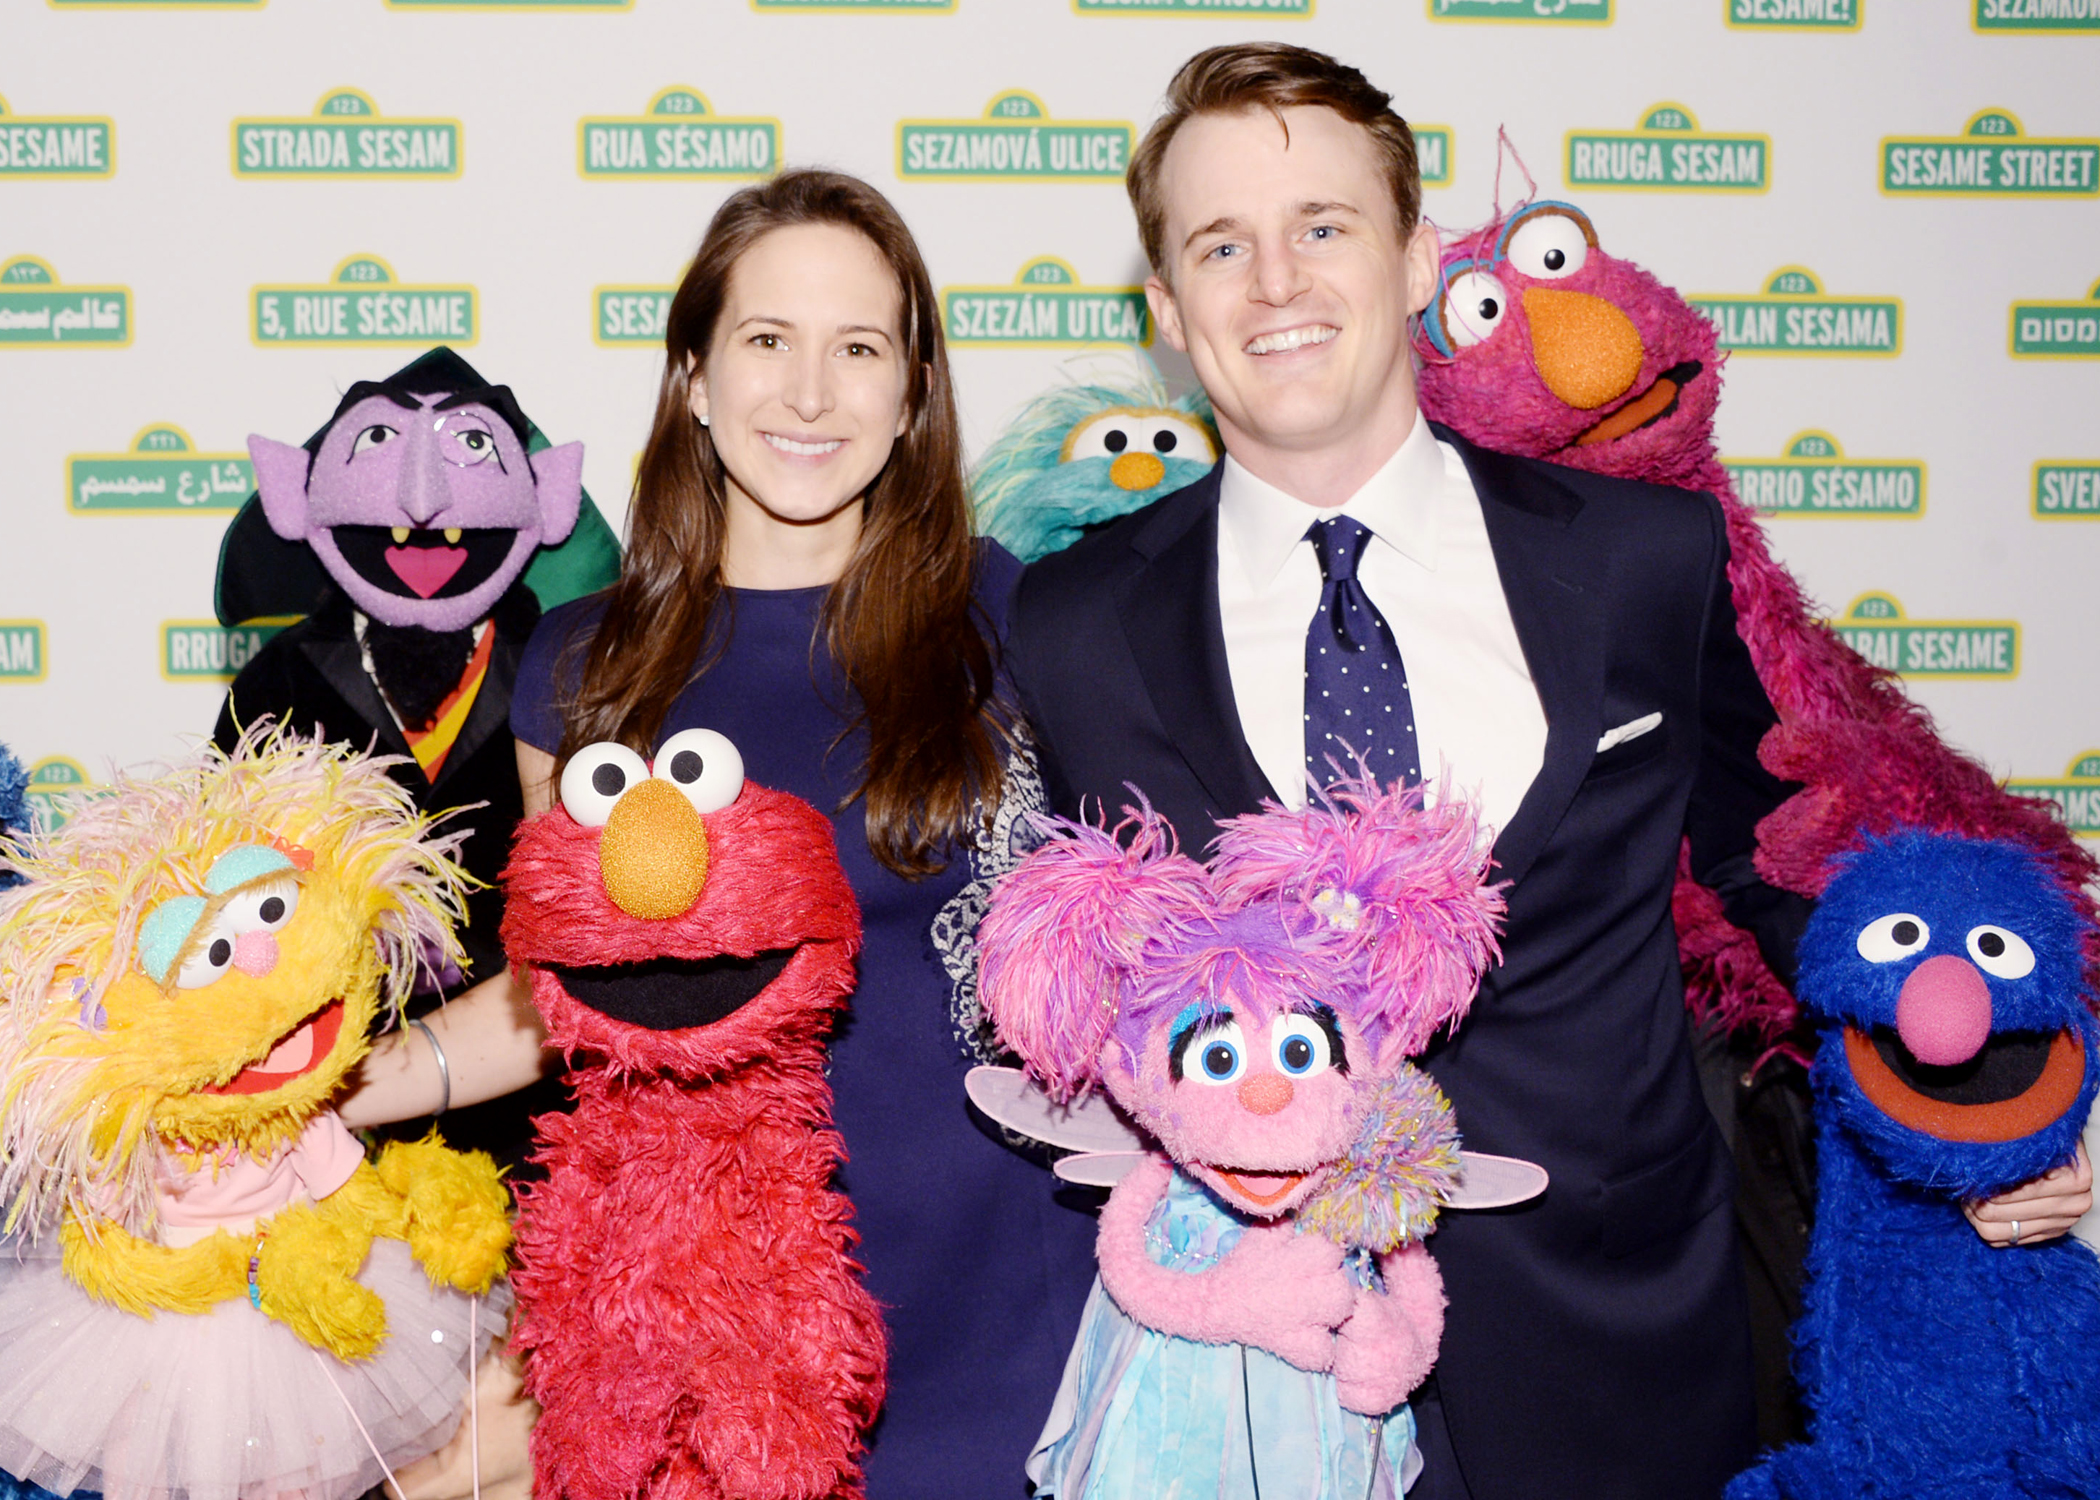 Will Cart with his wife Alexandra Cart at the 2014 Gala for Sesame Workshop